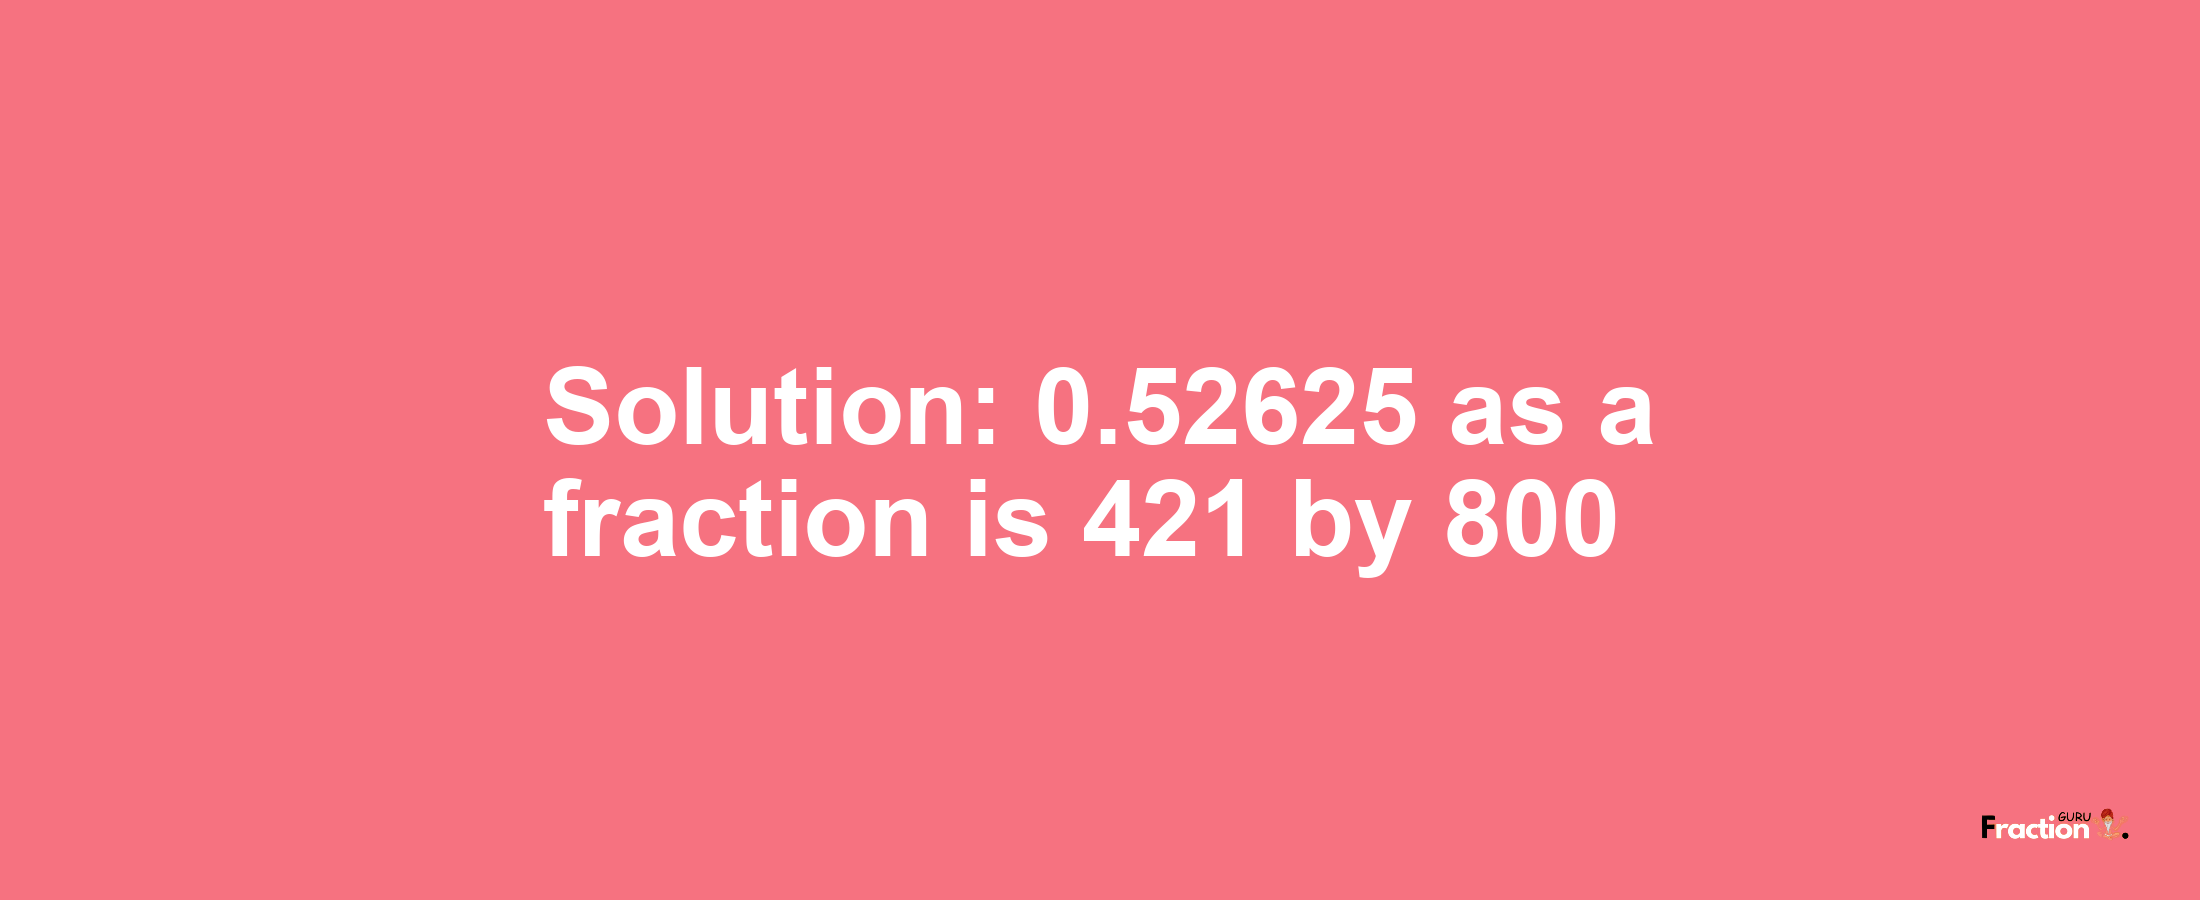 Solution:0.52625 as a fraction is 421/800